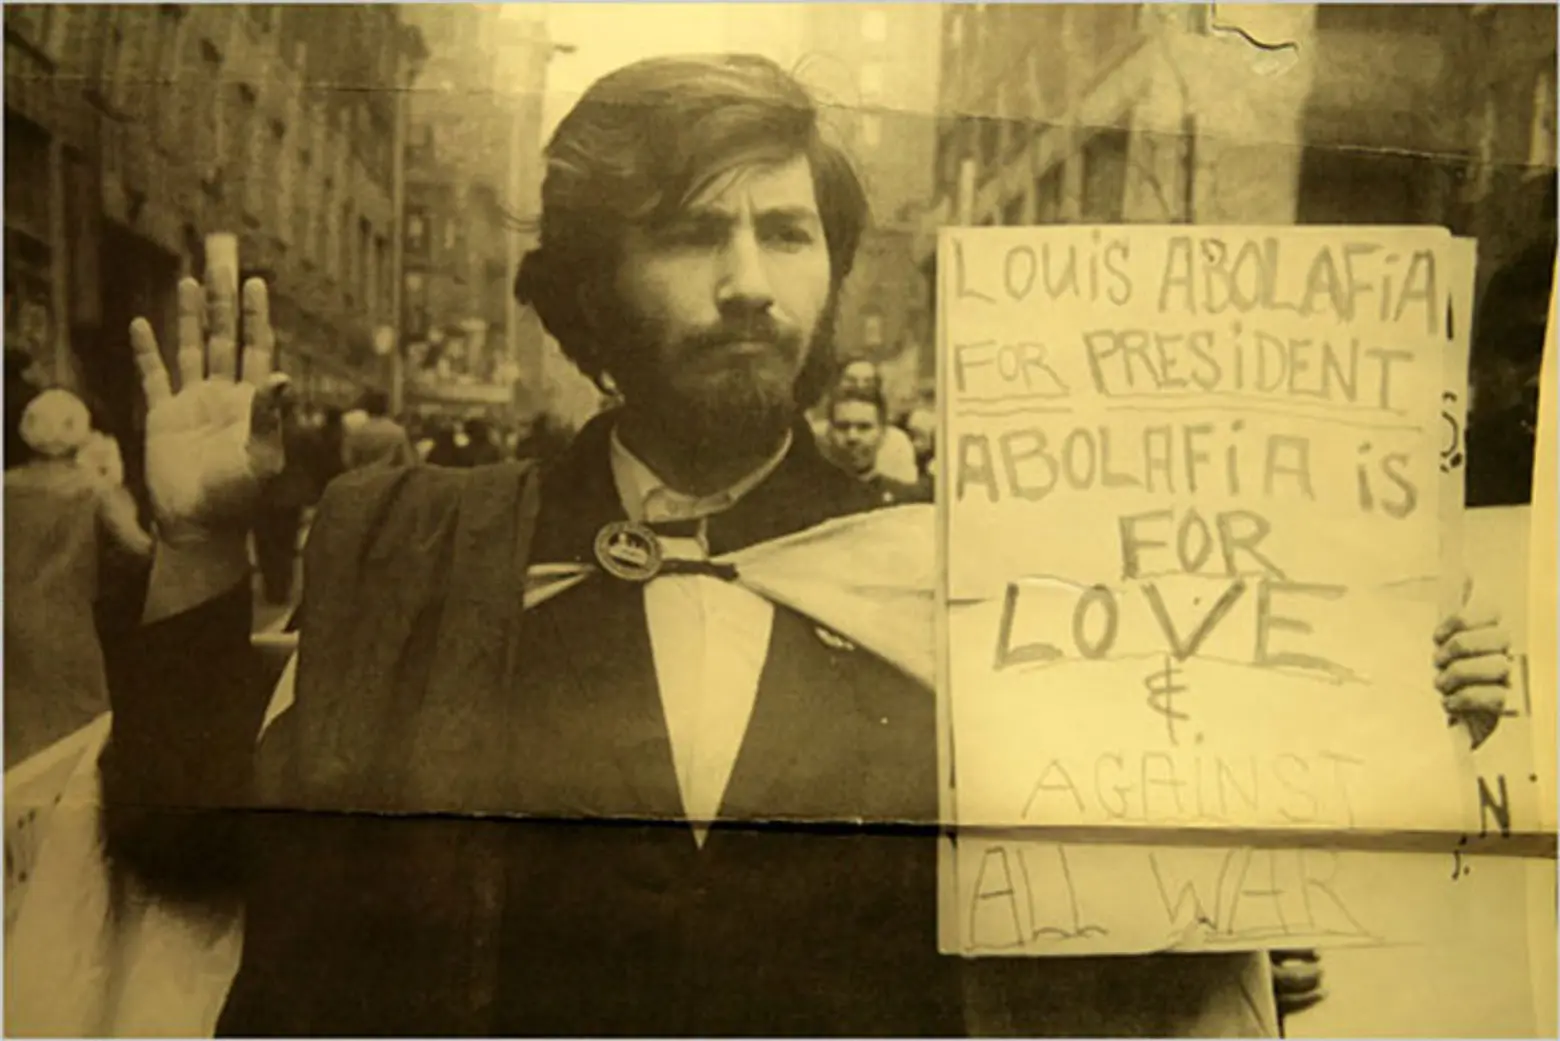 Back in ’68 an East Village Hippy Ran for President Against Nixon